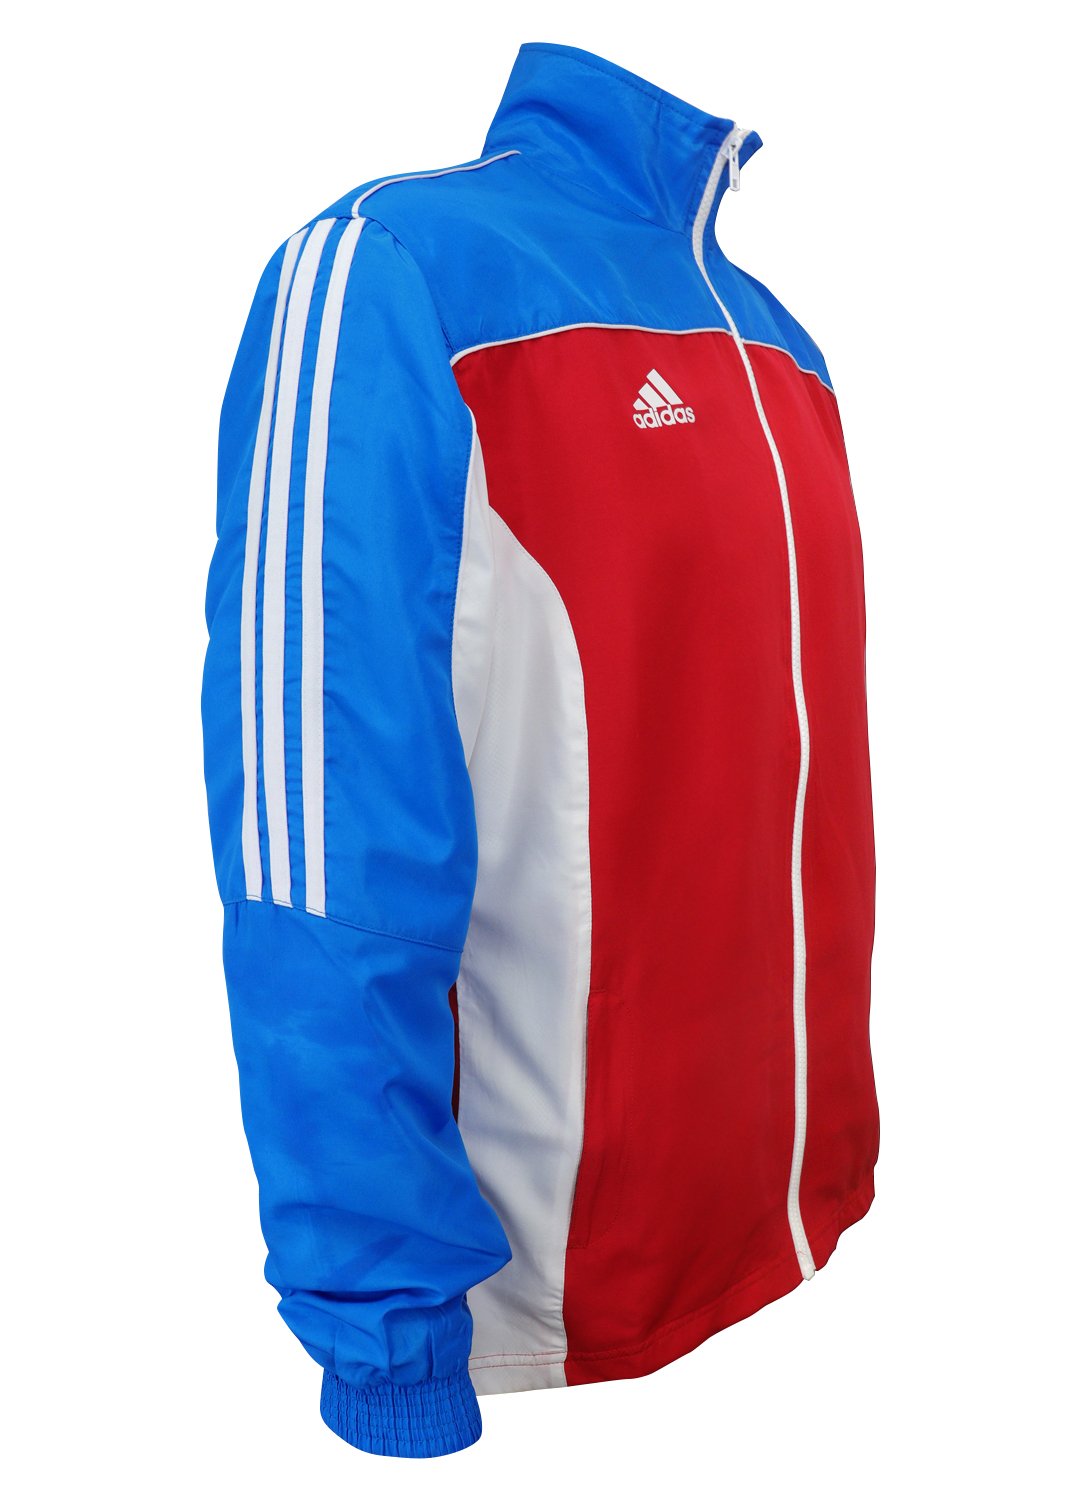 adidas Martial Arts 3-Stripes Light Tracksuit 100% Polyester Long Sleeve Jacket – Red/White/Blue